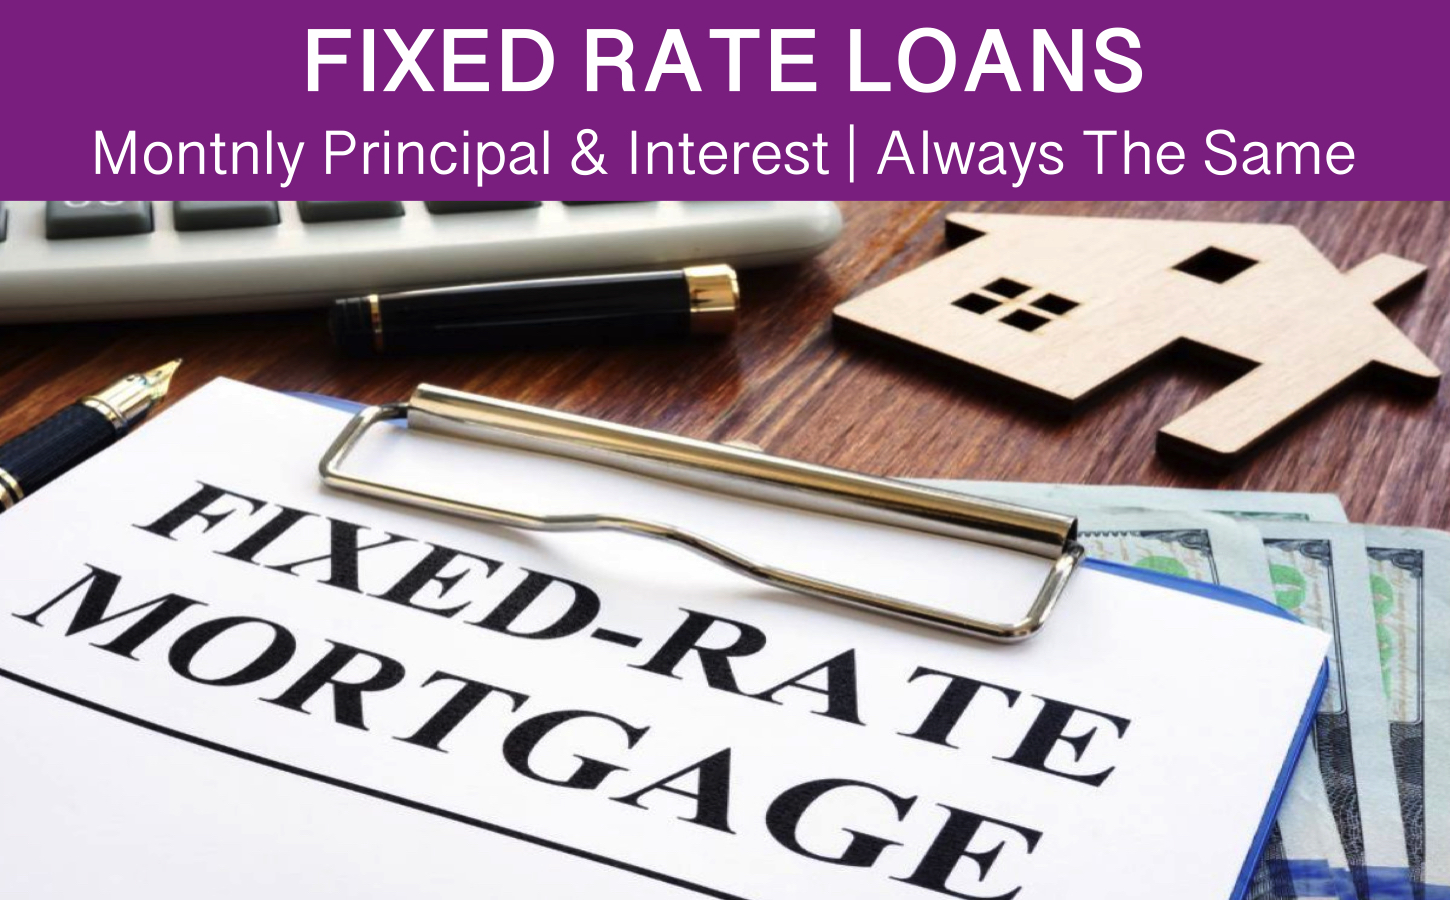 Fixed Rate Home Loan Financing, San Diego Home Loans Mortgage Experts